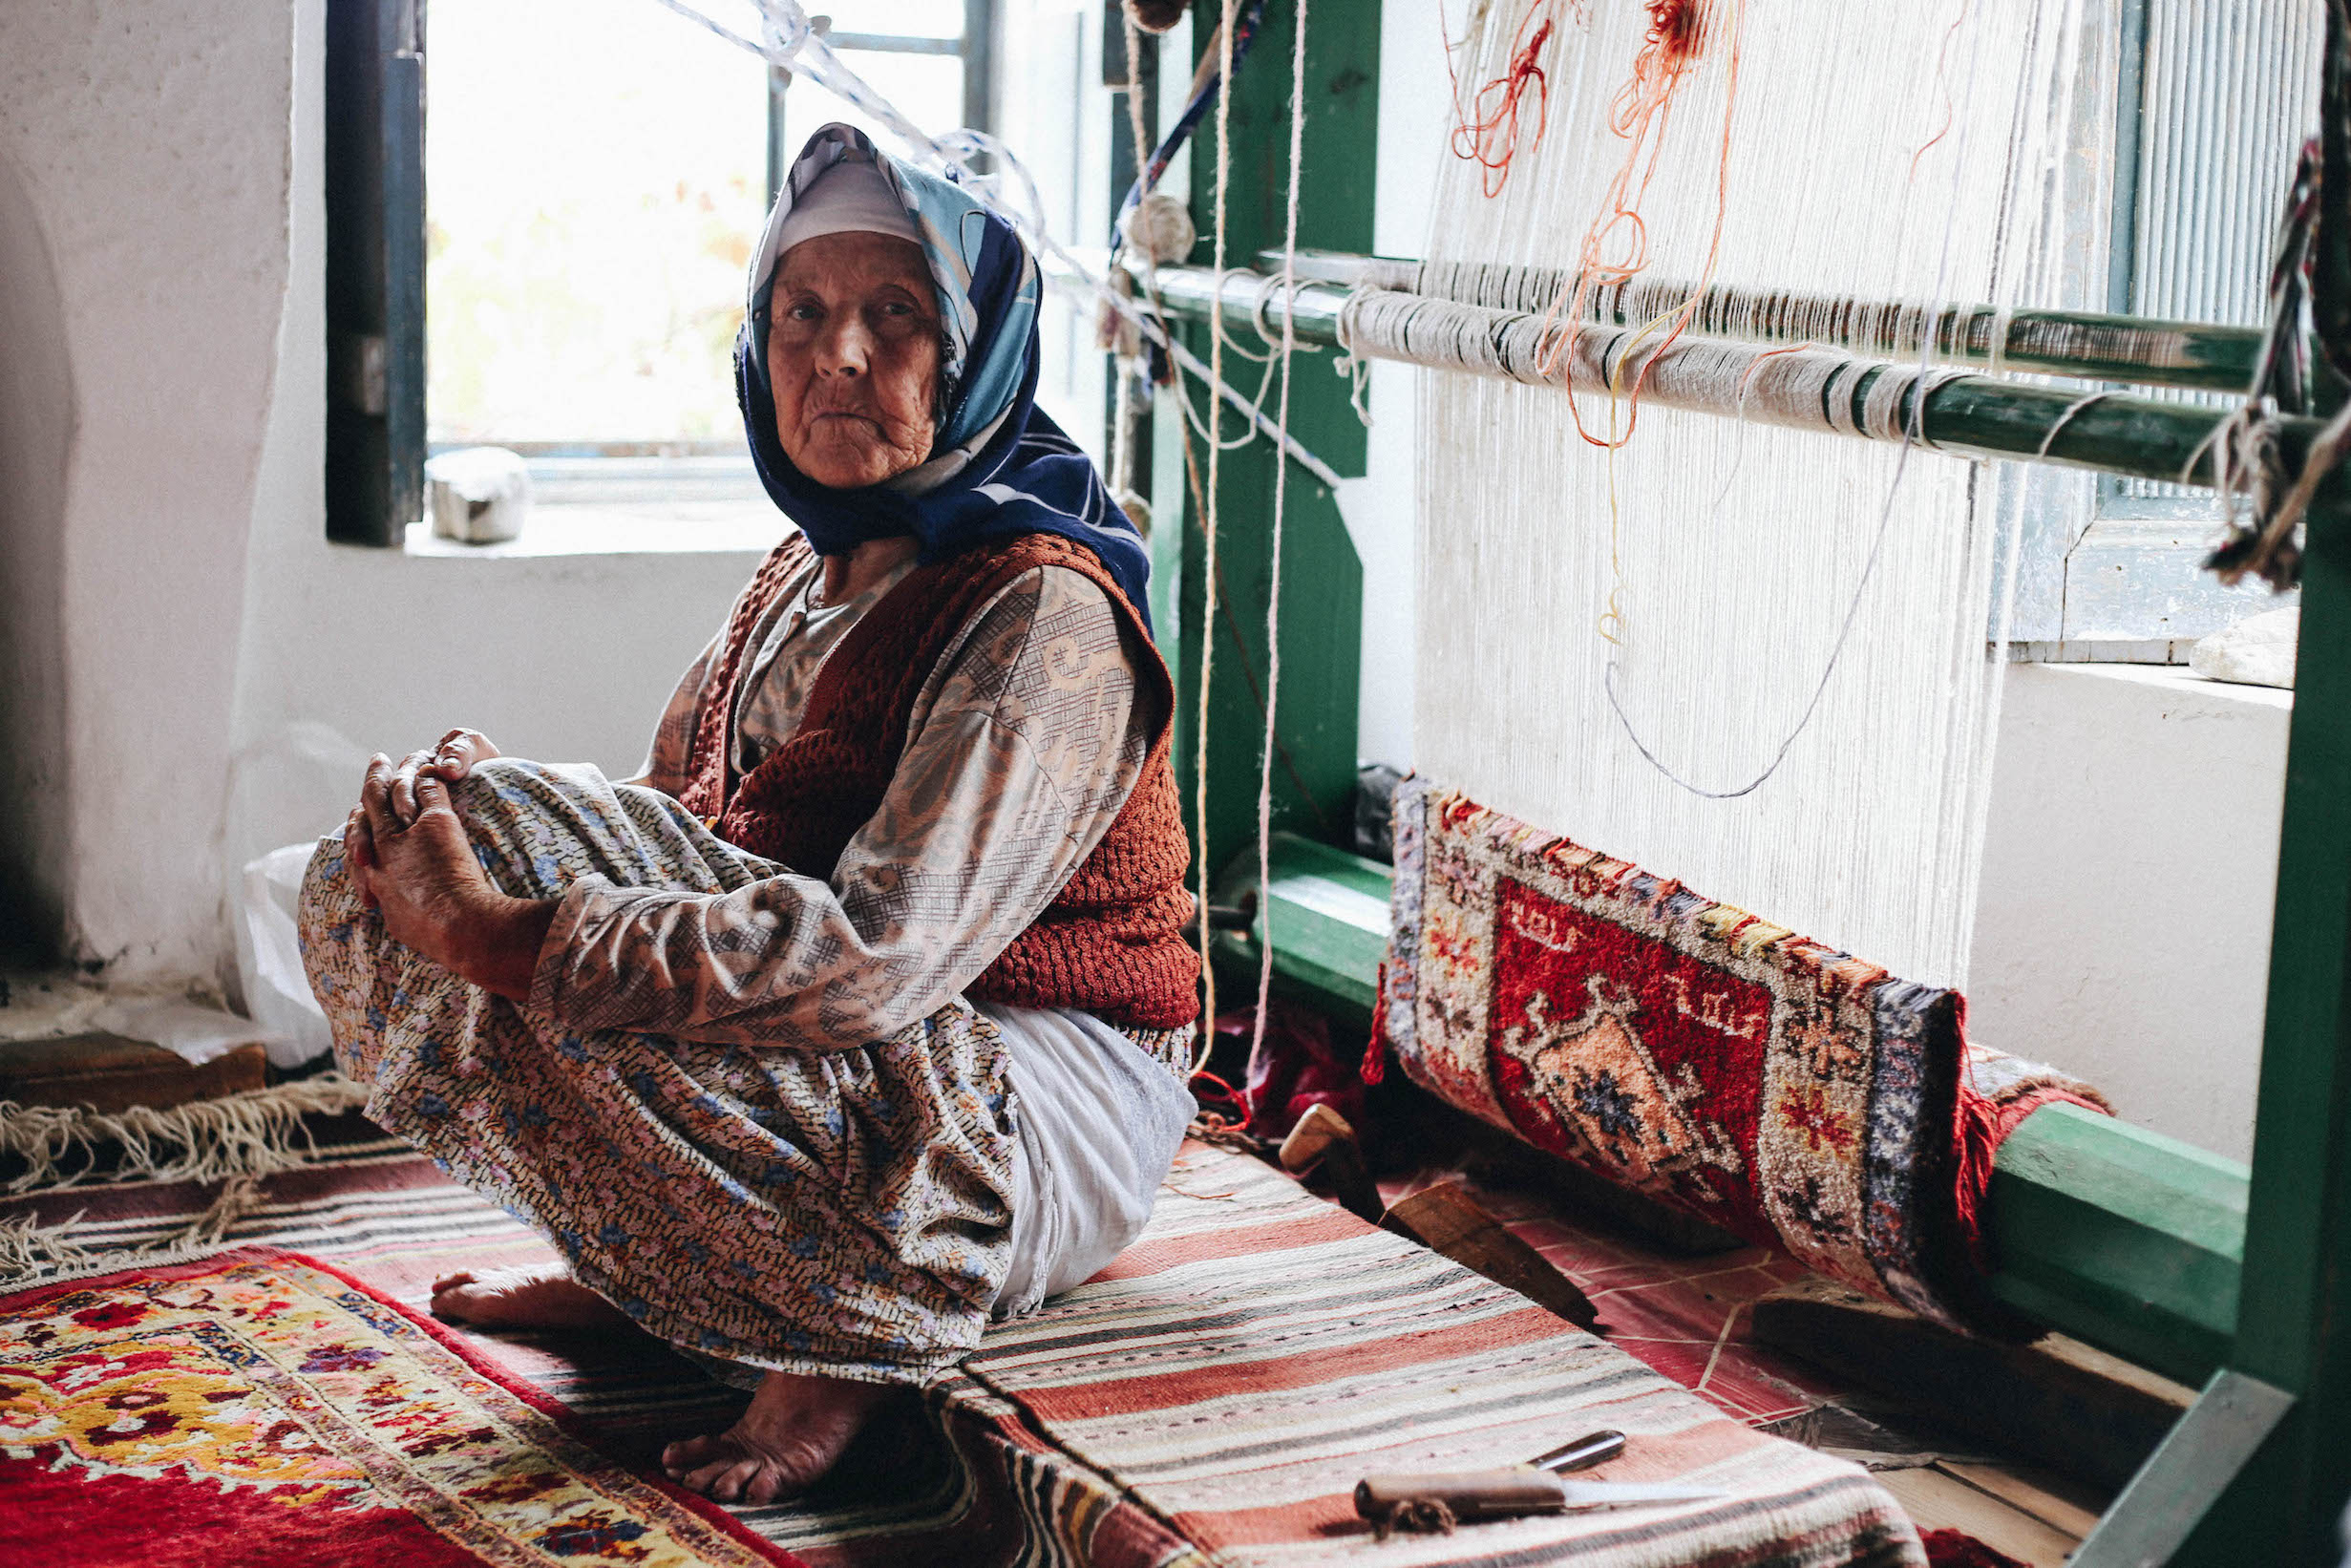 The most experienced weaver, 83 y.o. Gulsum, says that carpet is a diary for local women. With patterns they express feelings and explain their life. On her 1st carpet Gulsum made a girl with a book, when her father didn't allow her to enter school. 